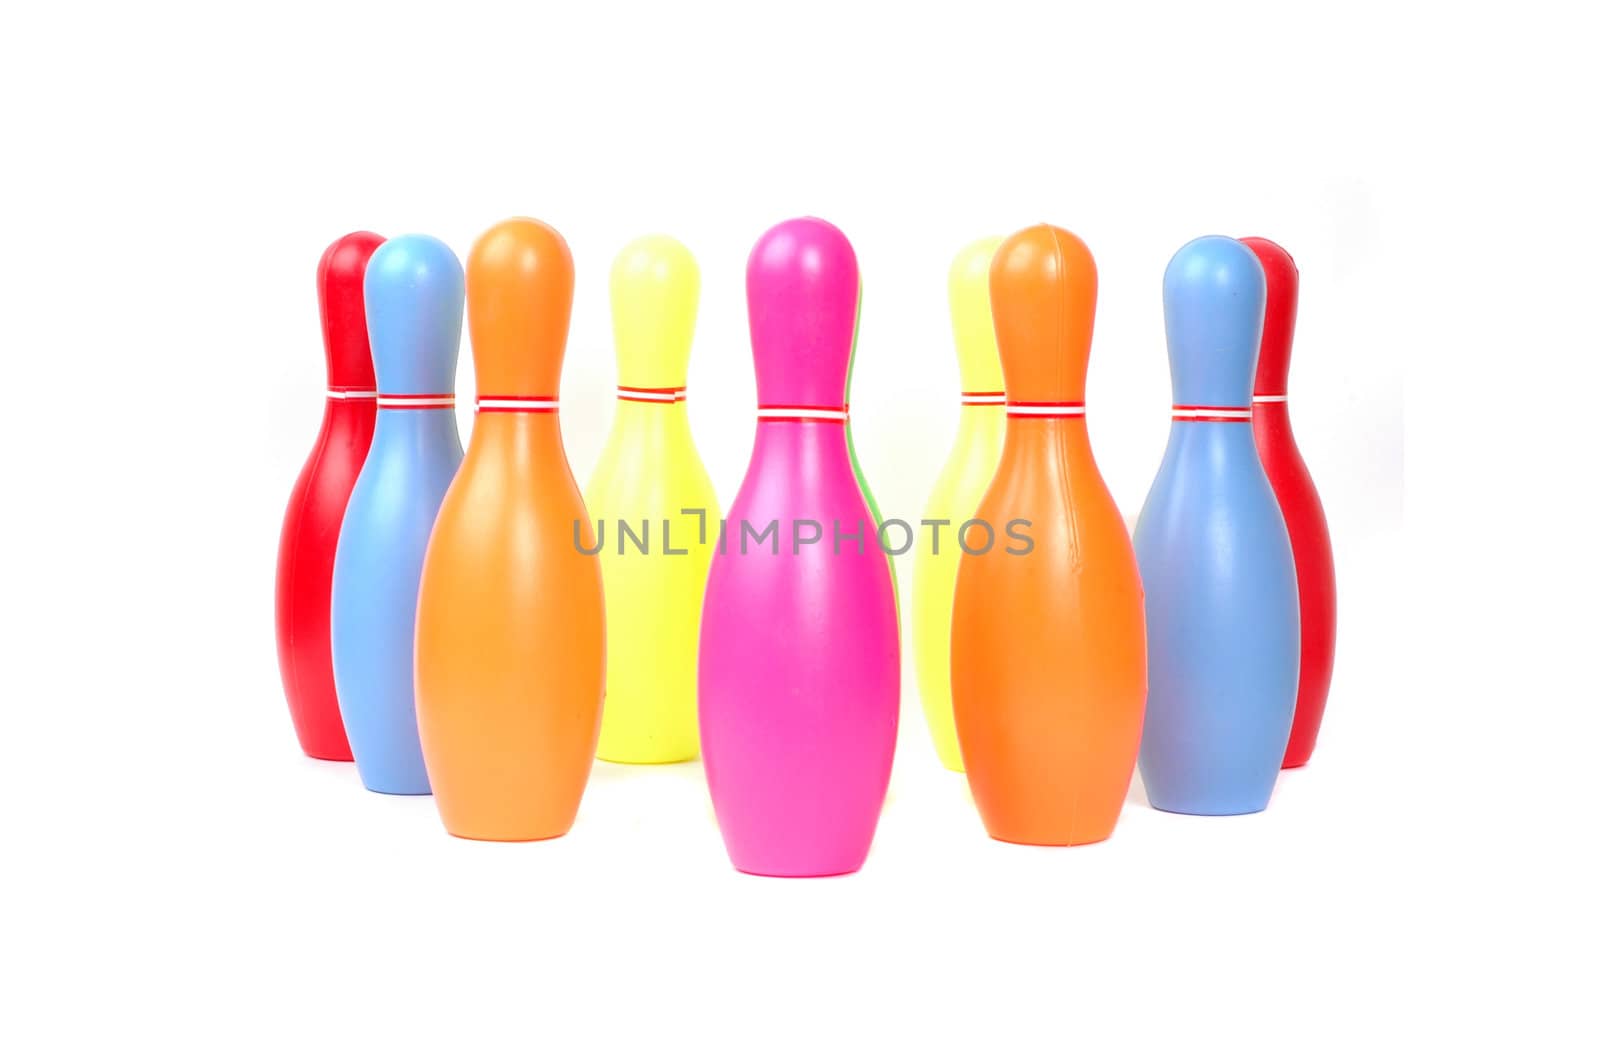 Row of colorful toy plastic bowling pins by antonihalim